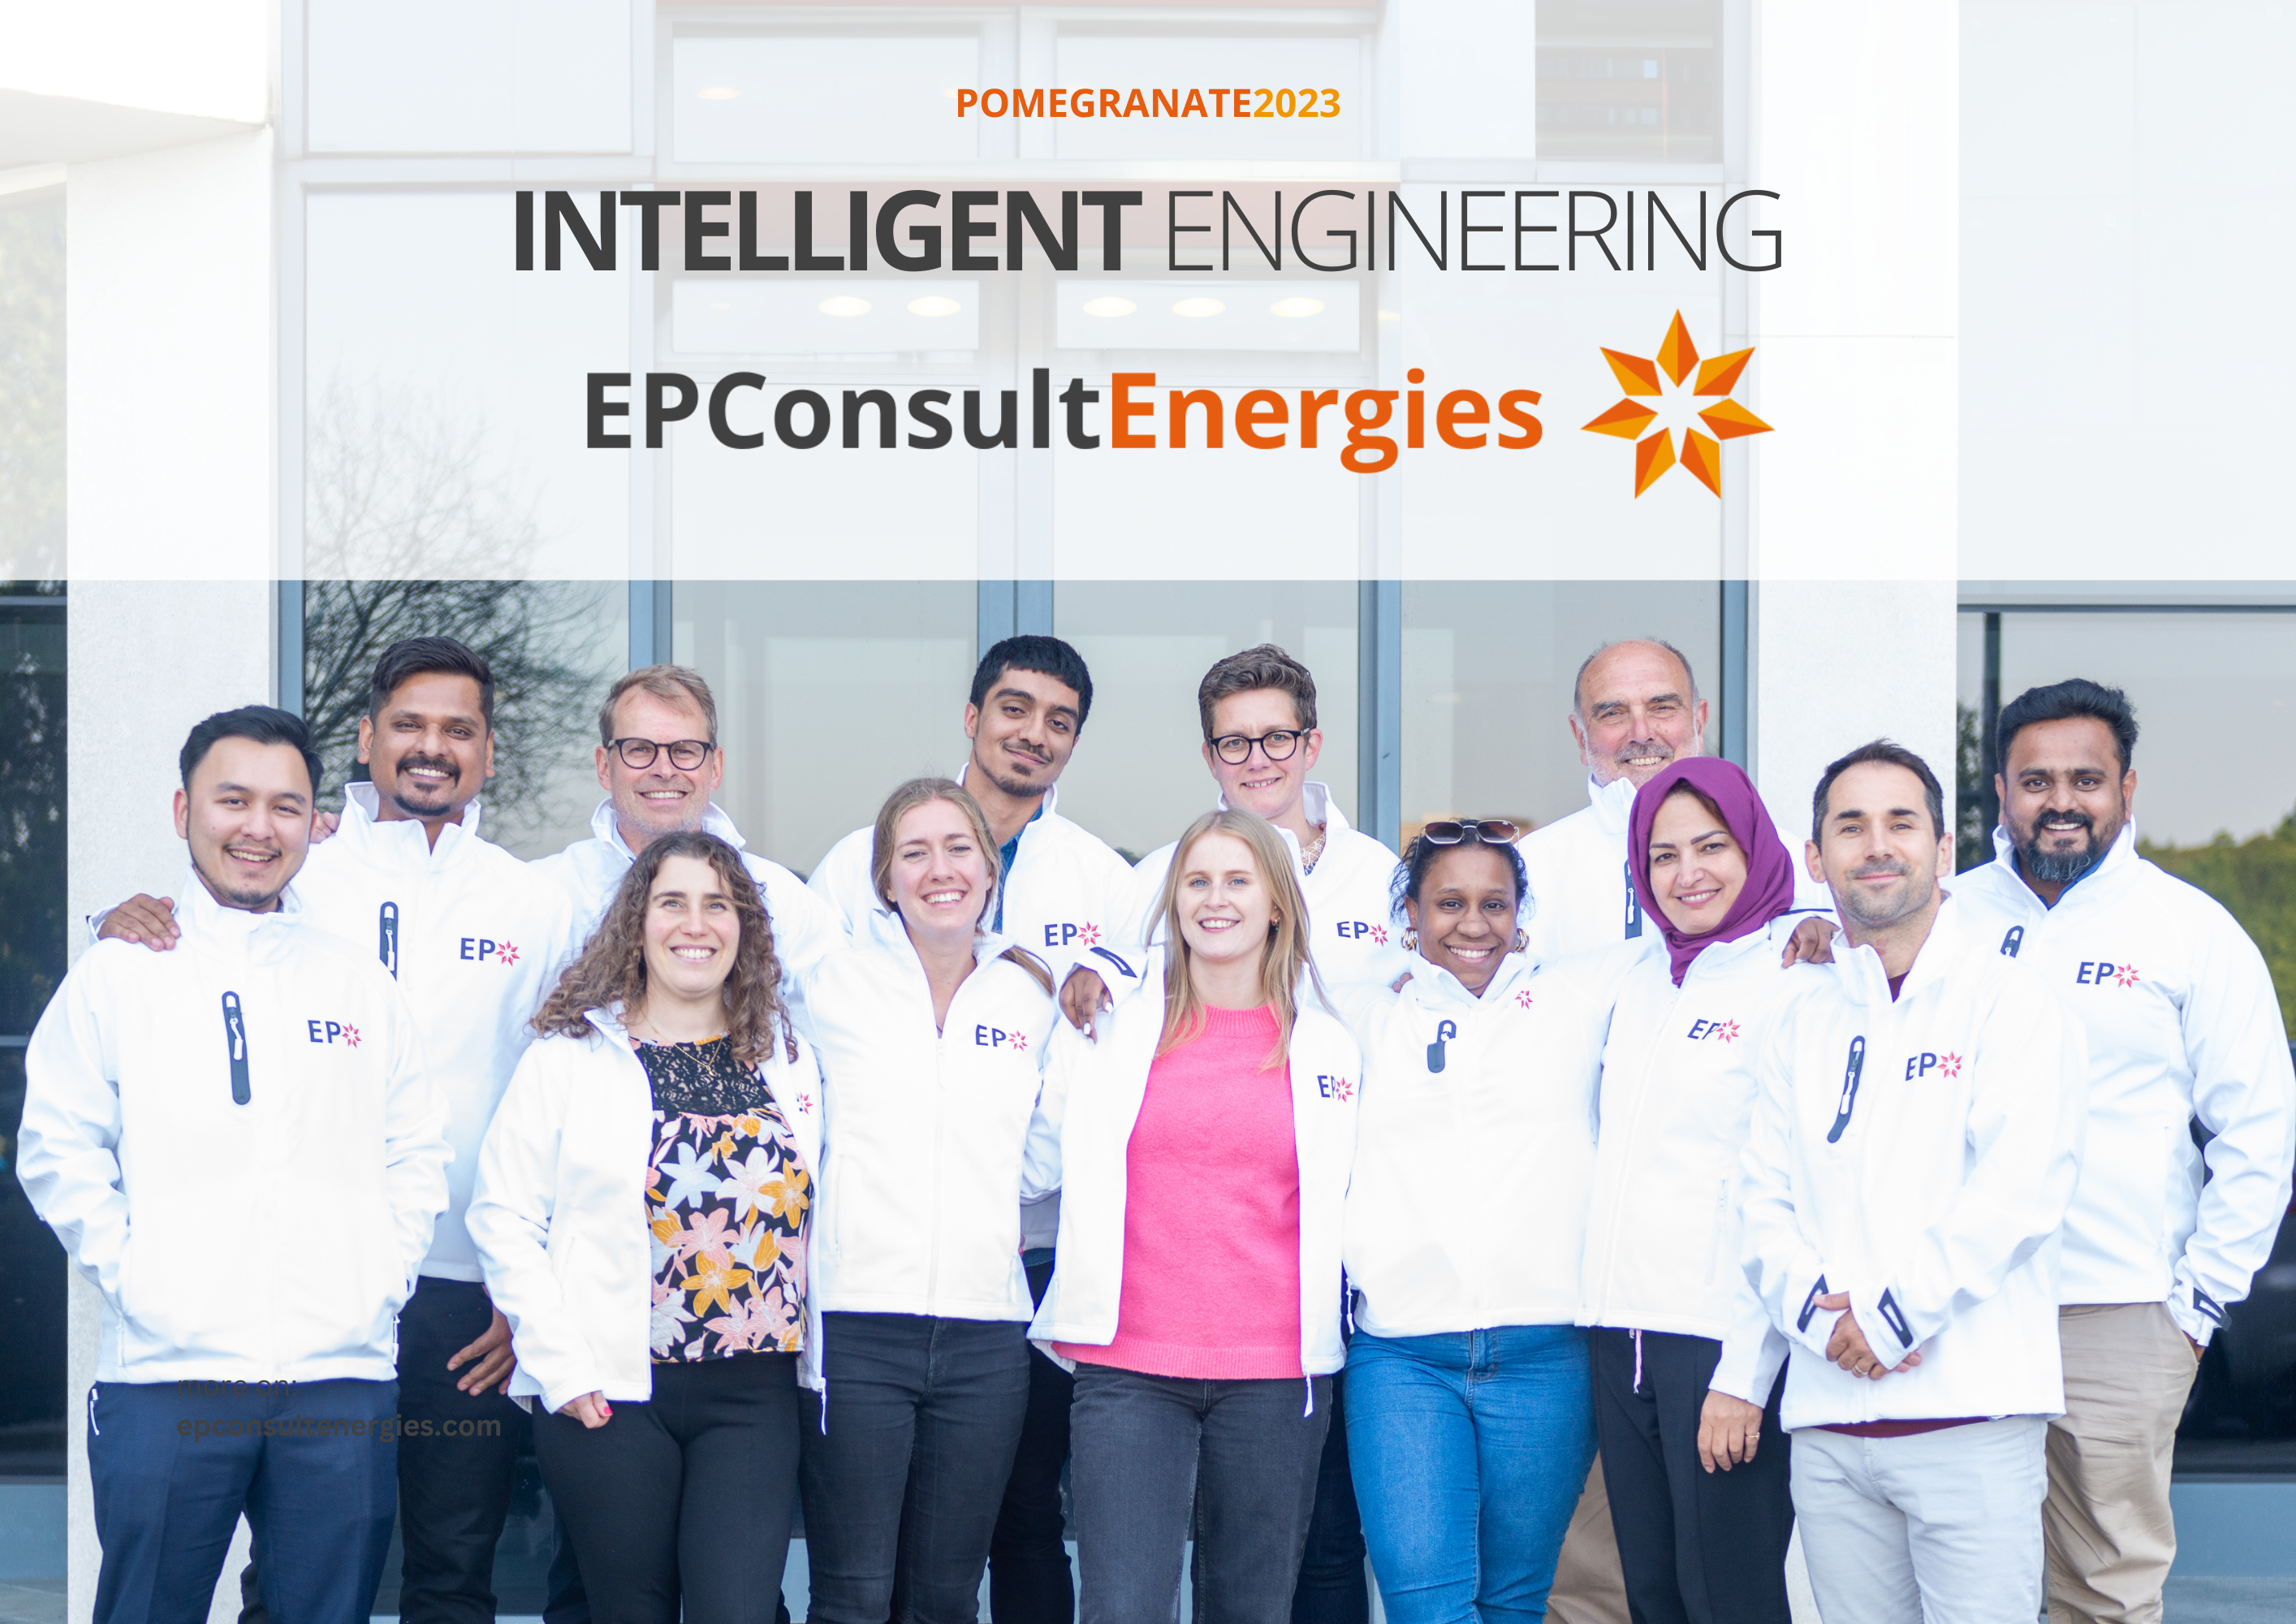 The Team of EPConsult Energies together in the Pomegranate event